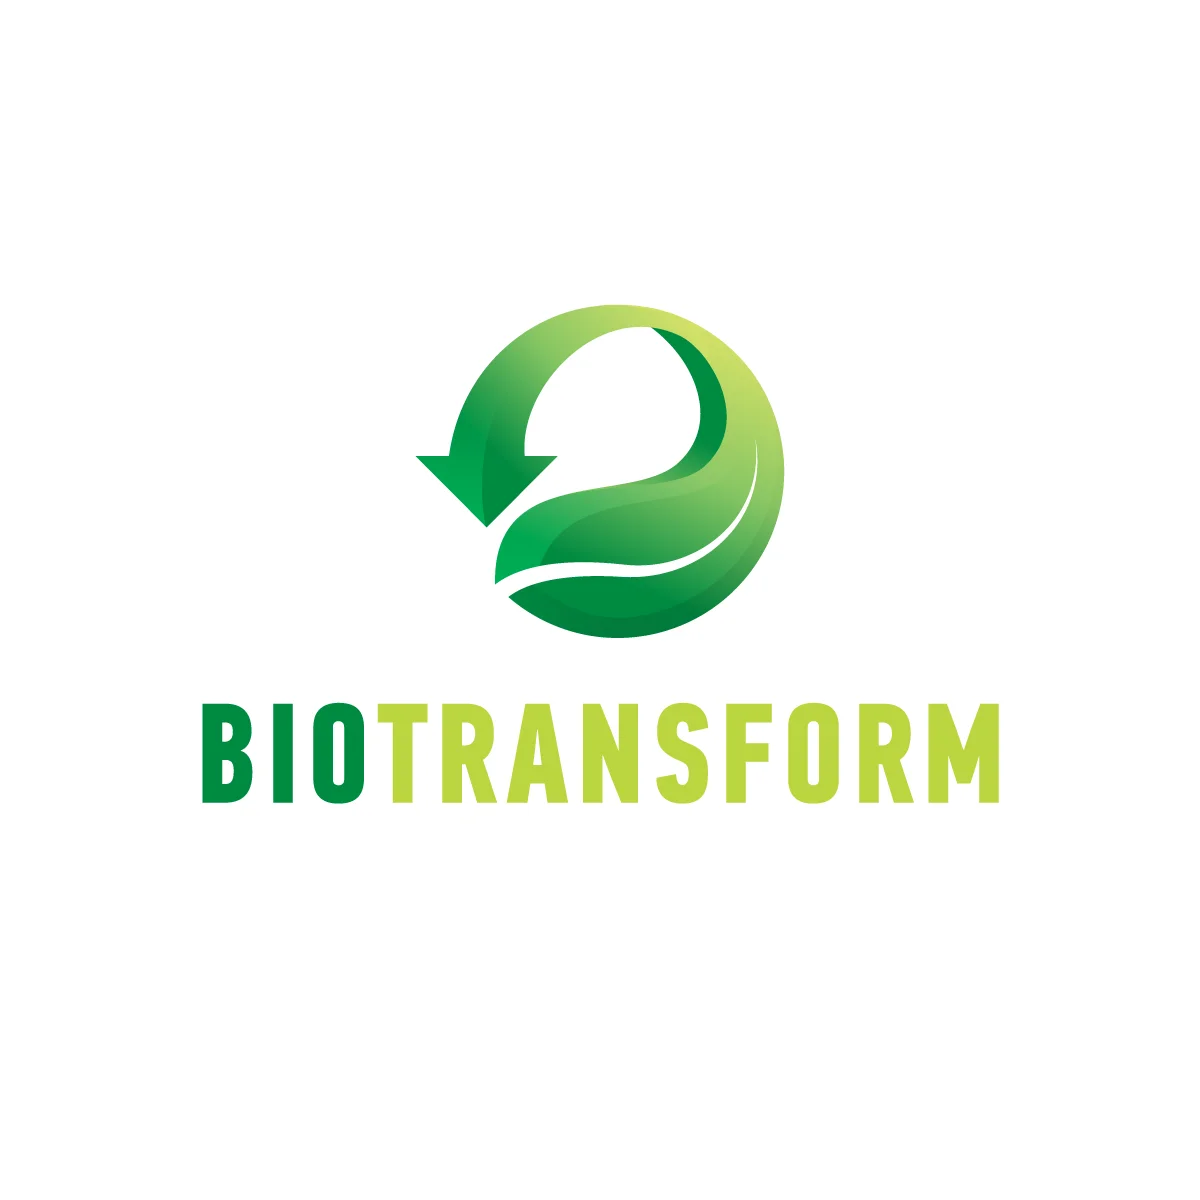 Go to the page of project - BIOTRANSFORM